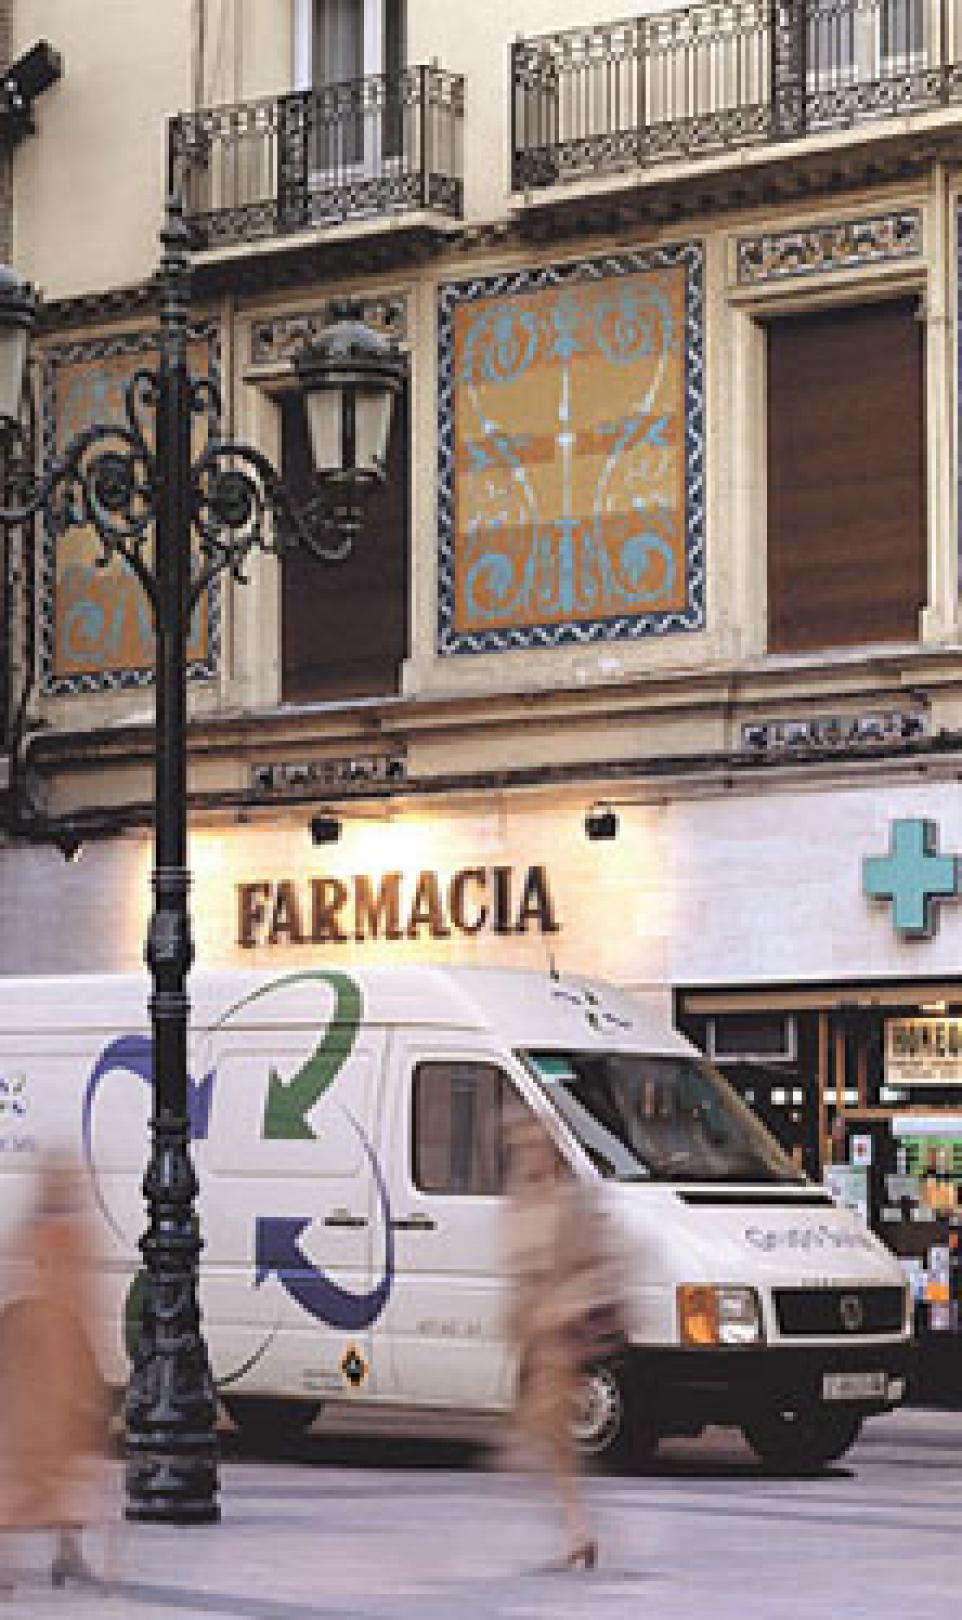 Storefront photograph of a pharmacy (Farmacia) in Spain